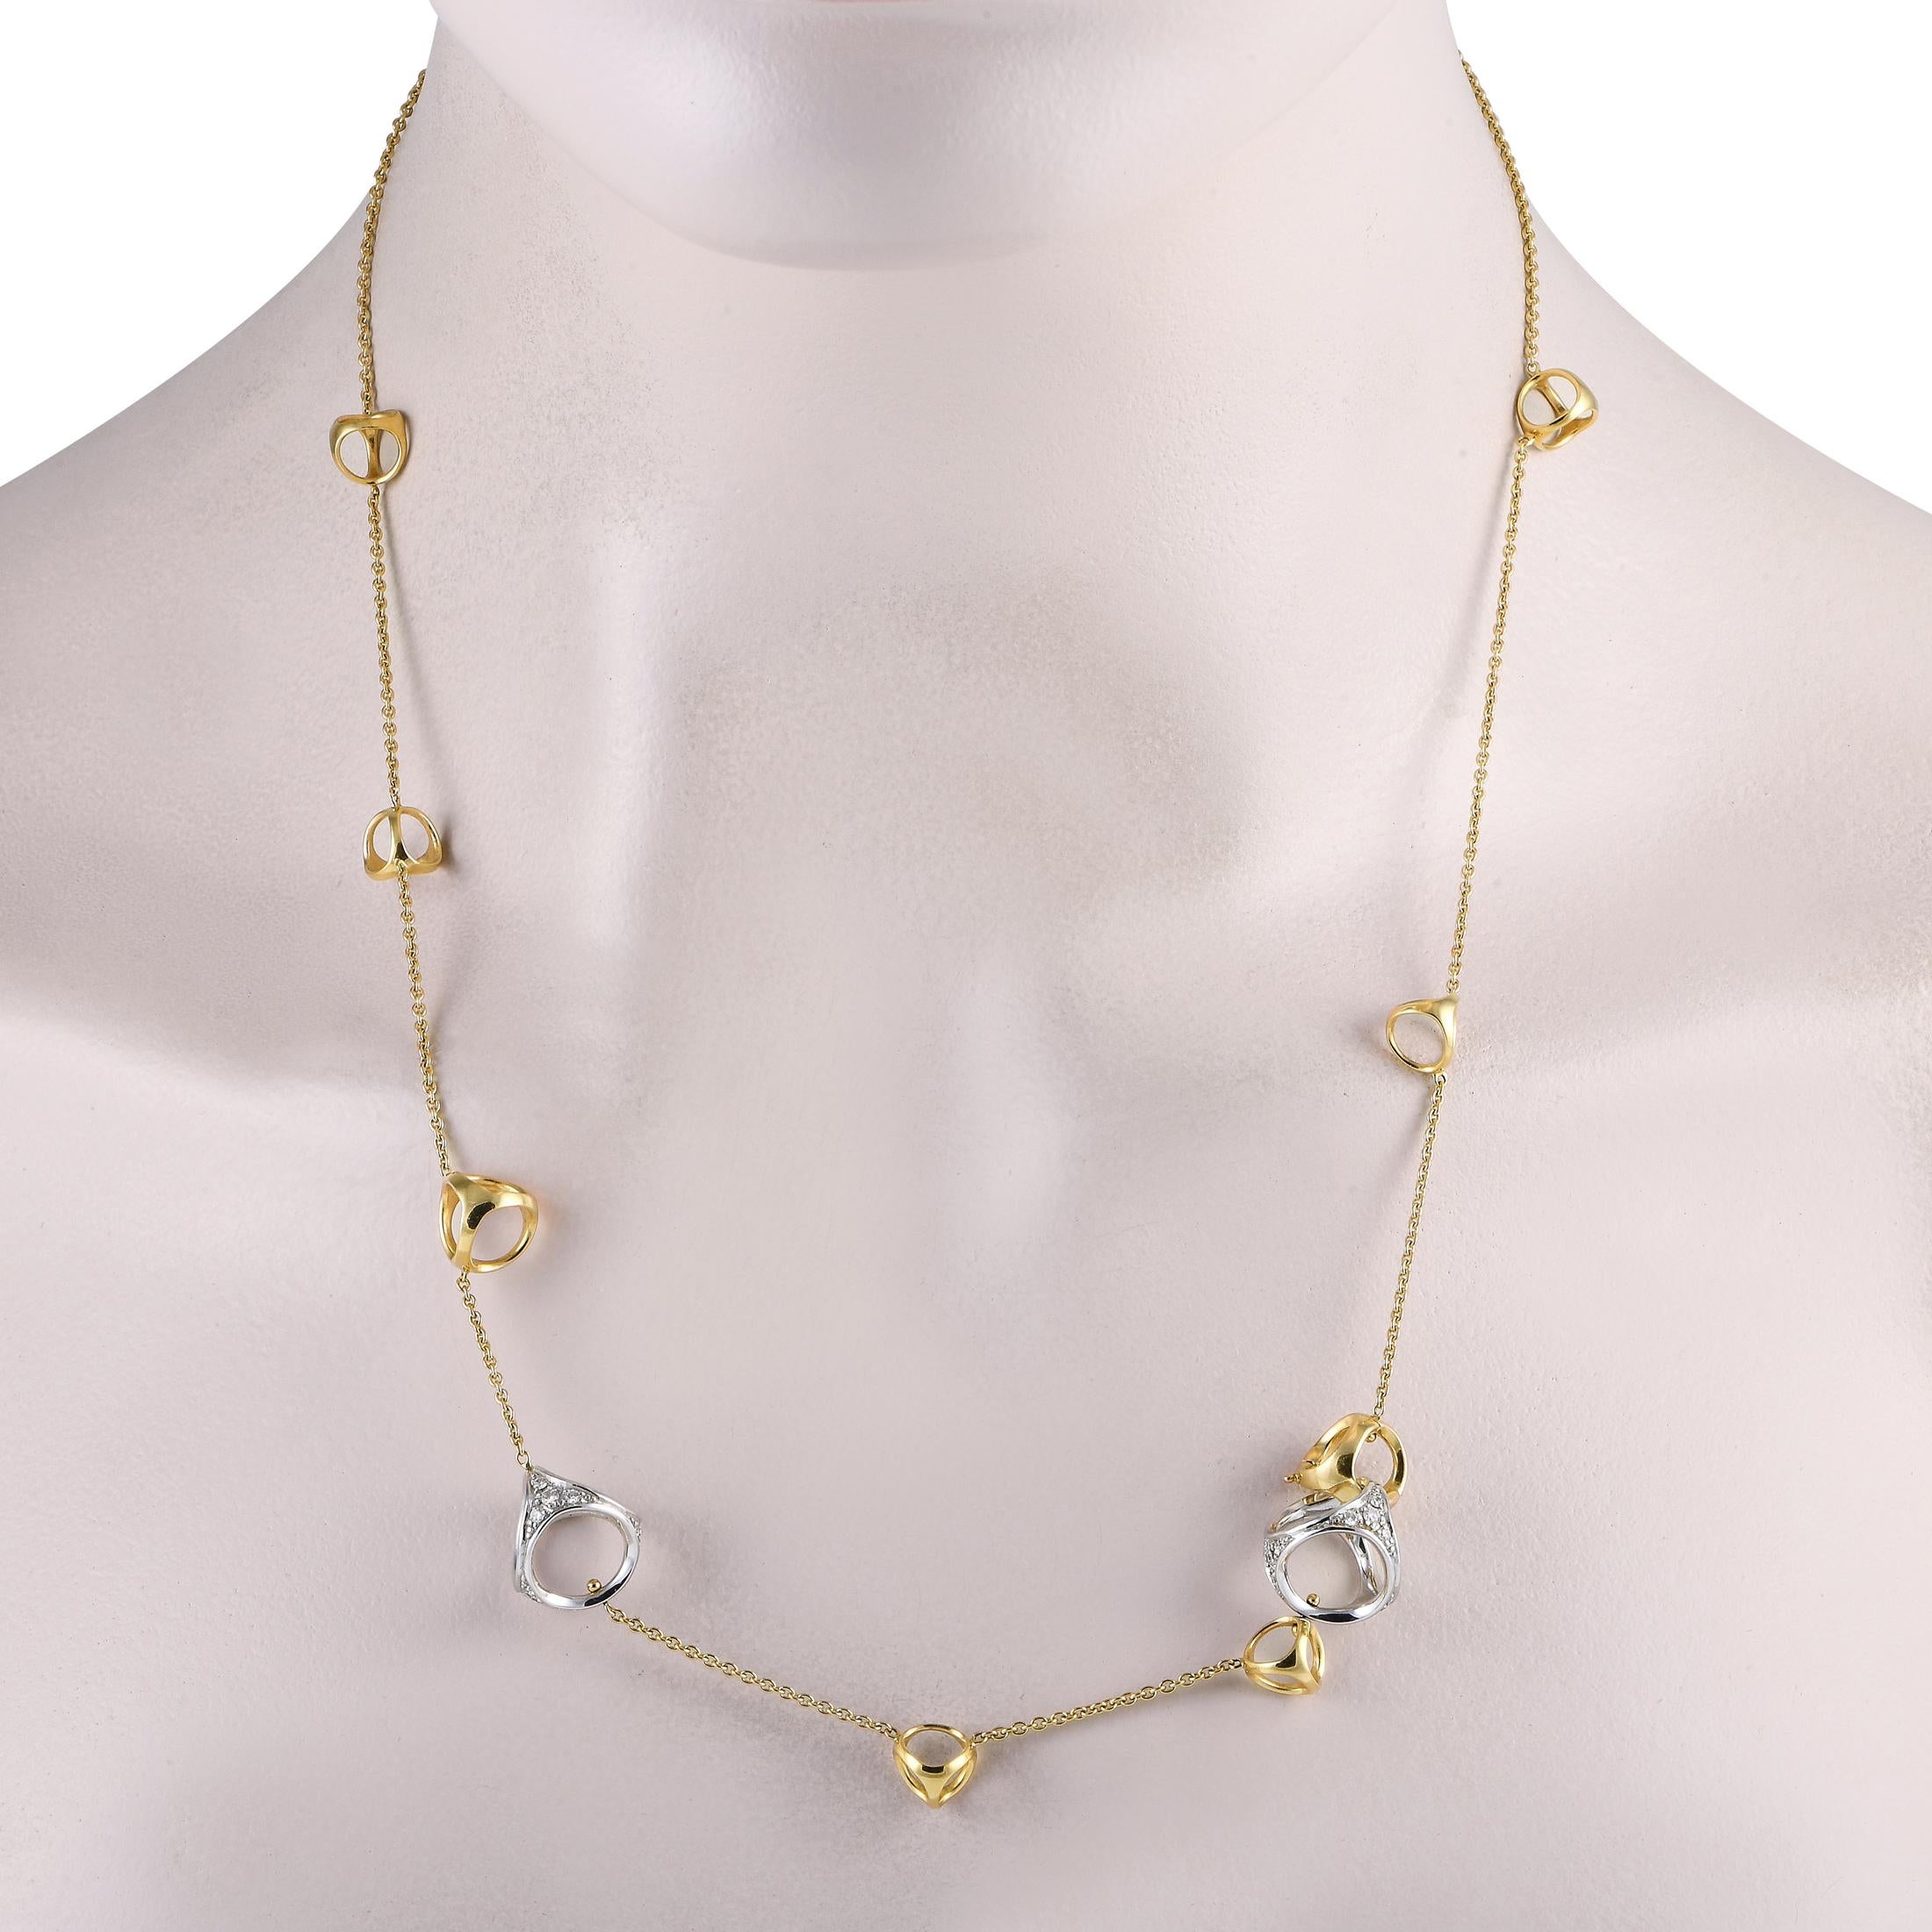 A lovely Di Modolo creation, this yellow-gold necklace features a trendy look infused with timeless appeal. It showcases a 22 long chain decorated with geometric bomb-inspired links in yellow gold. Bringing a glistening accent to the piece are two